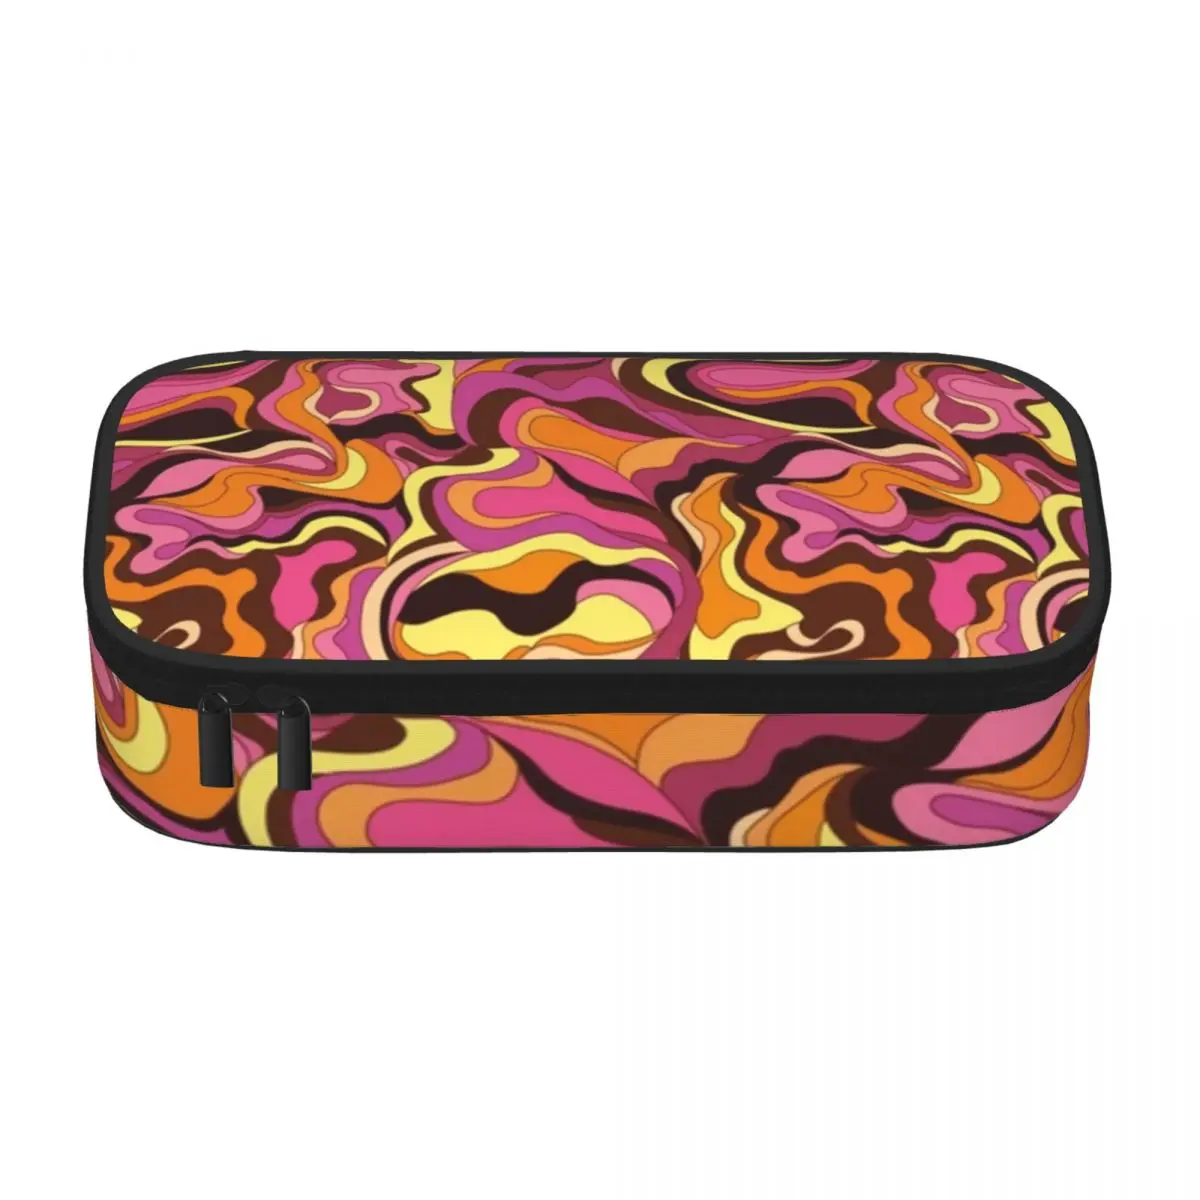 Psychedelic 60s Pencil Case Abstract Liquid Print Multi Function Kawaii Zipper Pencil Box For Teens Back to School Pen Bags